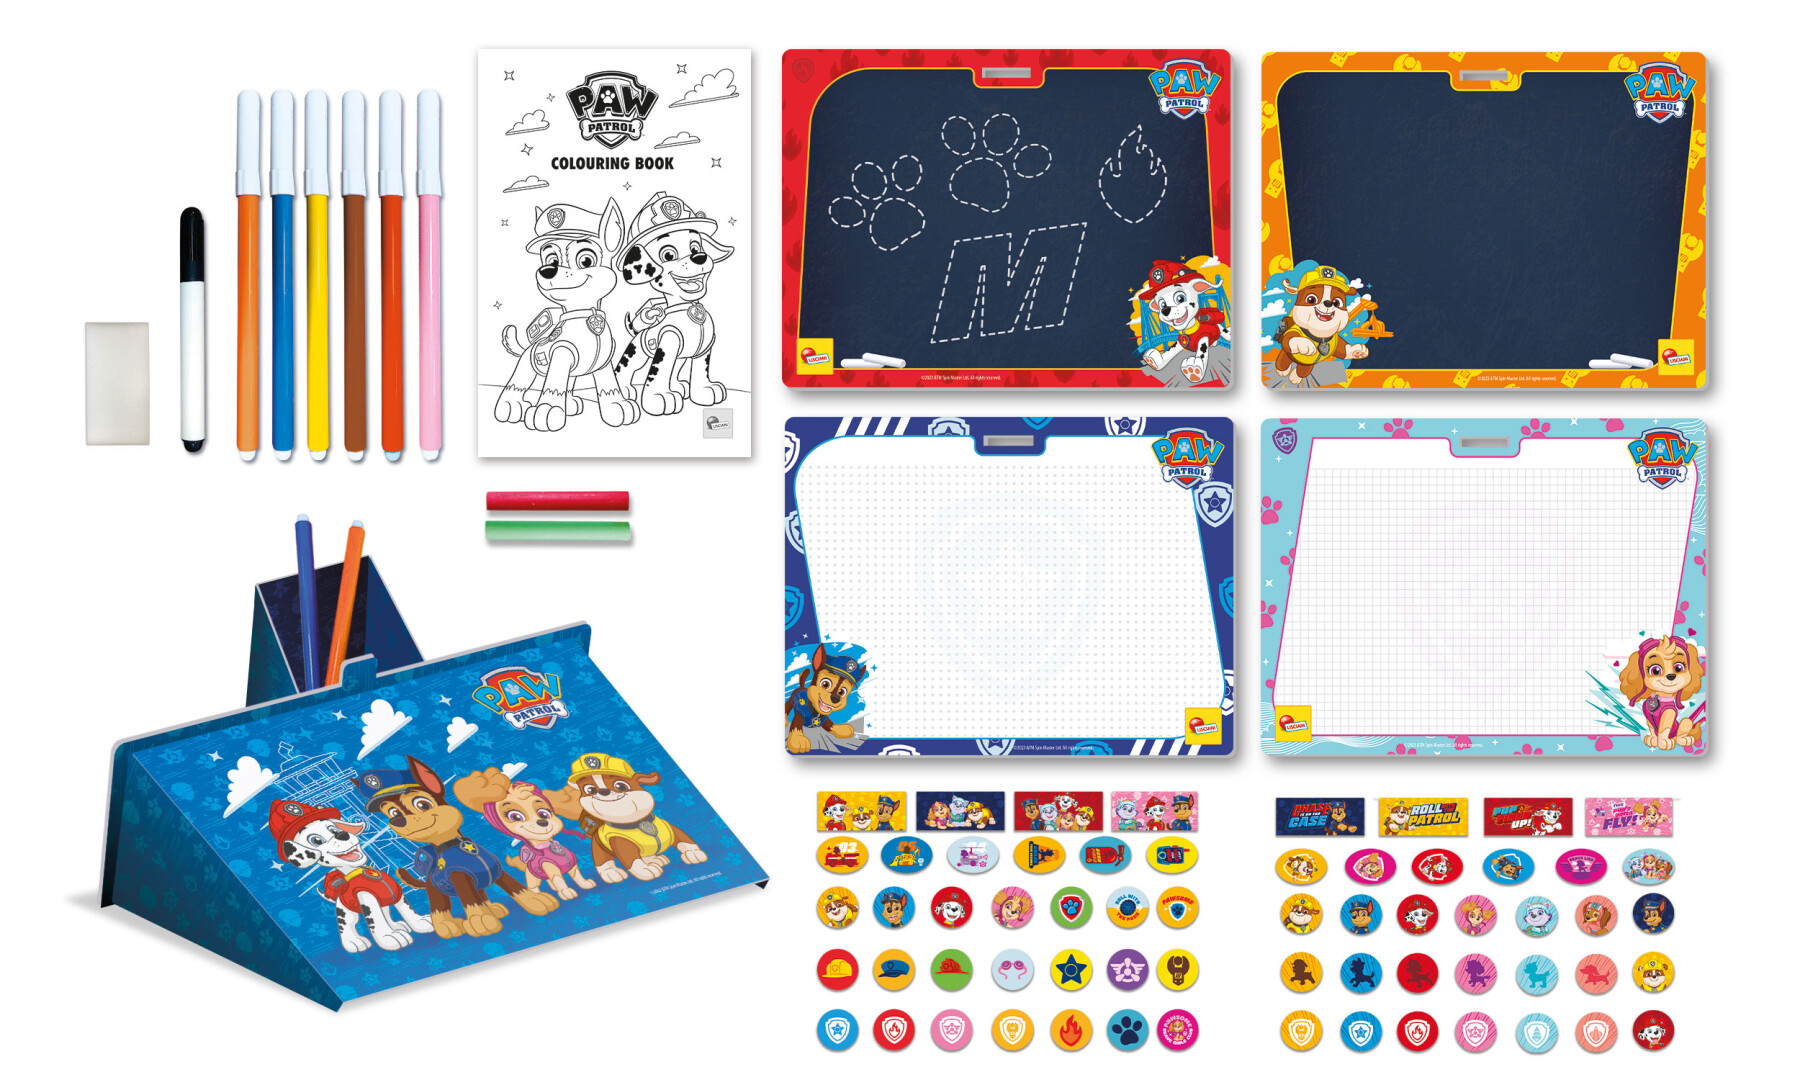 Paw patrol colouring & drawing school in a backpack - LISCIANI, Paw Patrol